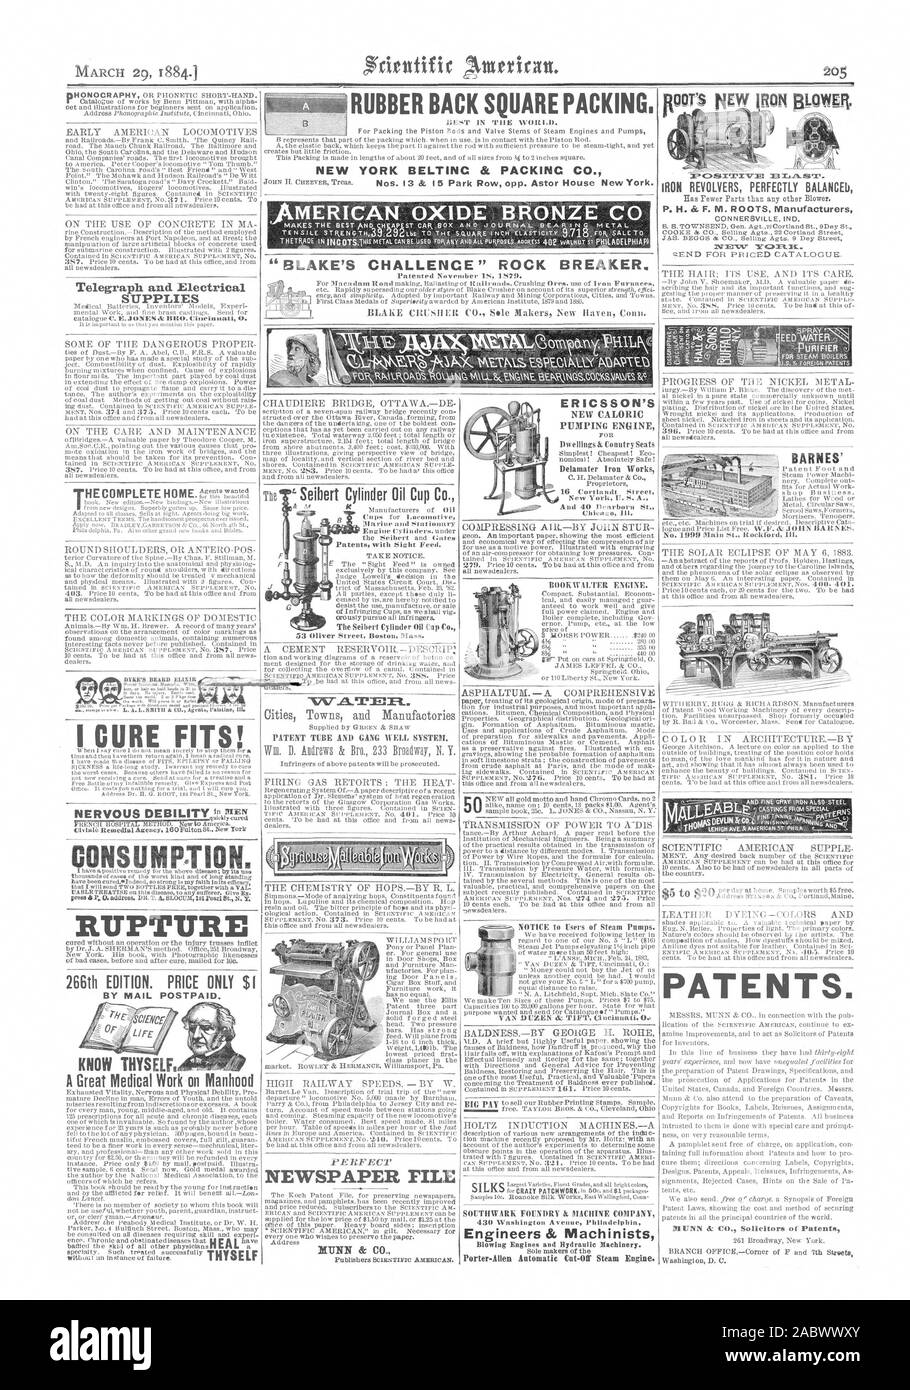 RUBBER BACK SQUARE PACKING. NEW YORK BELTINC & PACKINC C „AMERICAN OXIDE BRONZE C I CURE FIT CONSUMPTION RUPTURE BY MAIL POSTPAID. KNOW THYSELF' A Great Medical Work on Manhood L Seibert Cylinder Oil Cup Co. Engine Cylinders. under 'CiNTALTM1=1 NEWSPAPER FILE NUNN & CO. ERICSSON'S NEW CALORIC PUMPING ENGINE FOR Chicag ). Telegraph and Electrical SUPPLIES HE COMPLETE HOME SOUTHWARK FOUNDRY & MACHINE COMPANY Engineers & Machinists Porter-Allen Automatic Cnt-Of Steam Engine. IRON REVOLVERS PERFECTLY BALANCEb P. H. & F. NI. ROOTS Manufacturers COOKE at CO. Selling Agts. 22 Cortland Street BARNES Stock Photo